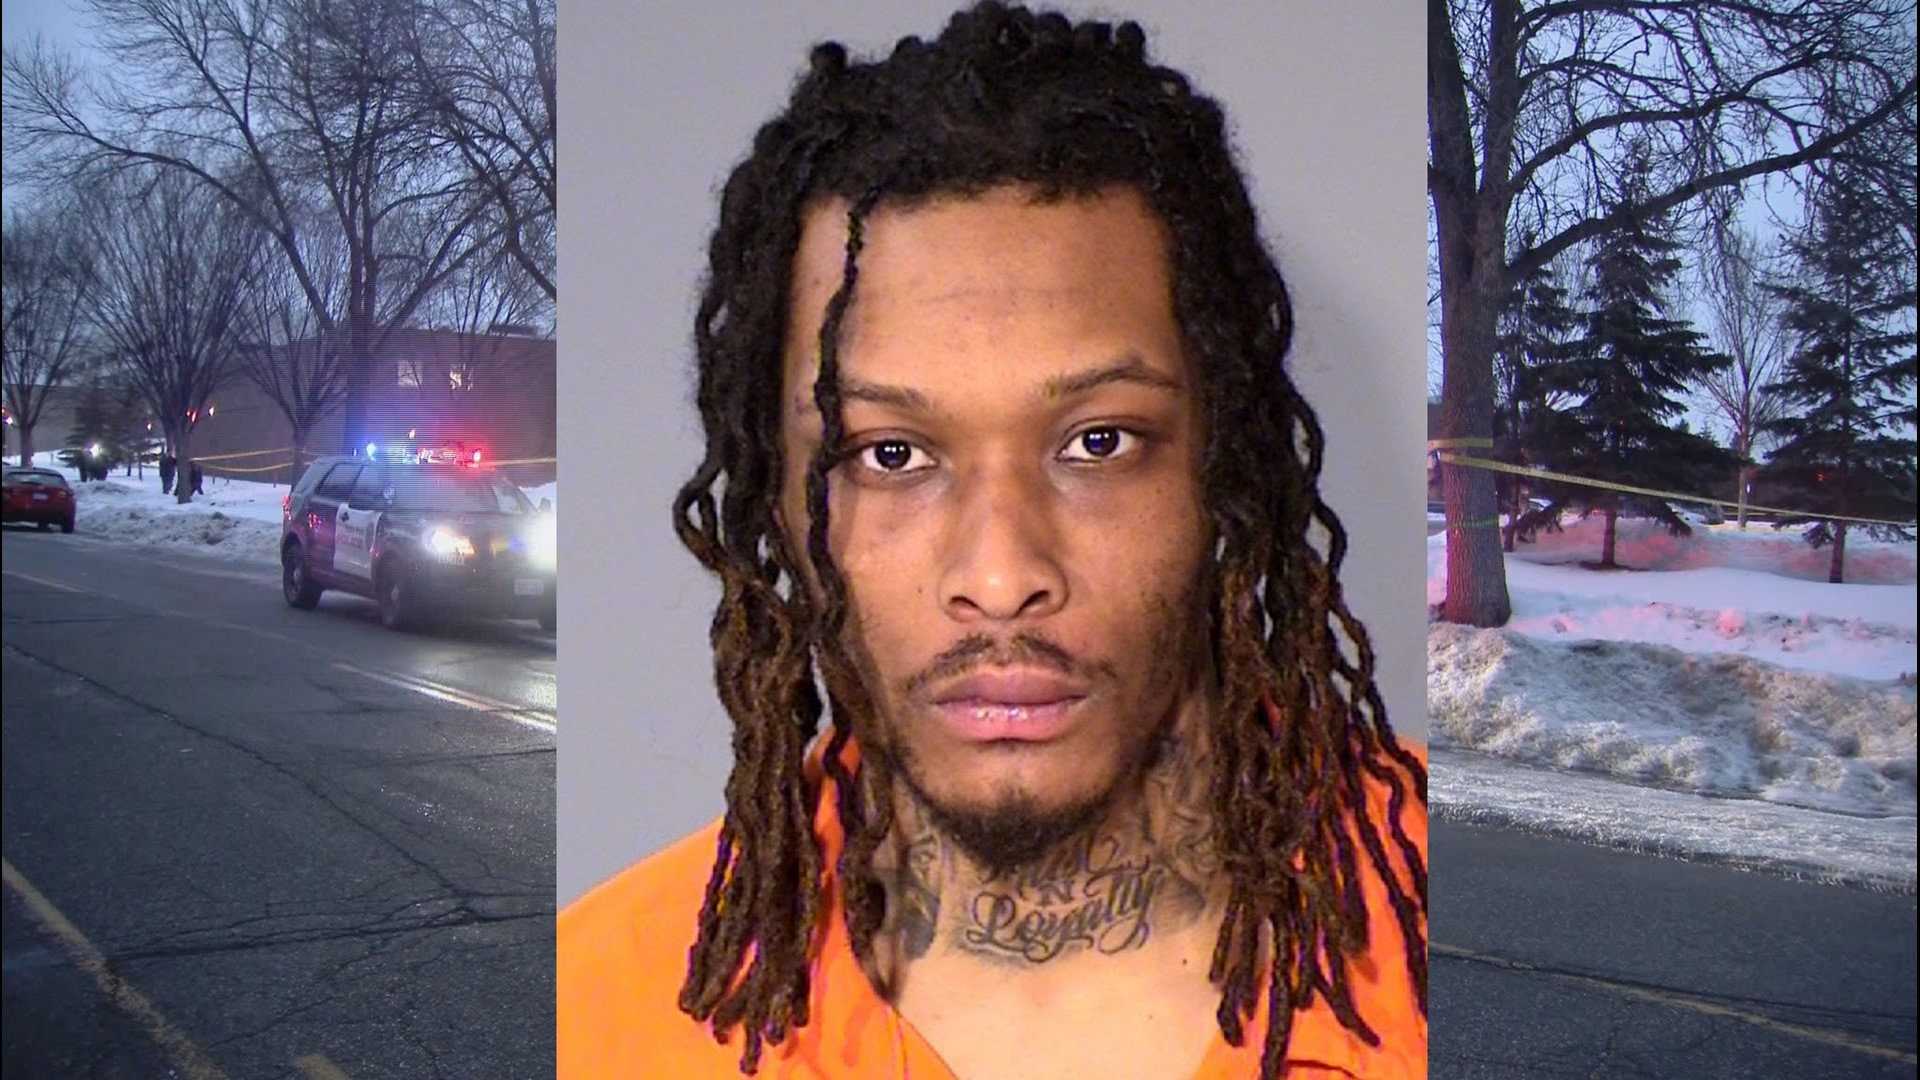 Prosecutors say 26-year-old Exavir Dwayne Binford Jr. argued with the victim and another teen before he pulled a gun and shot the 16-year-old in the head.